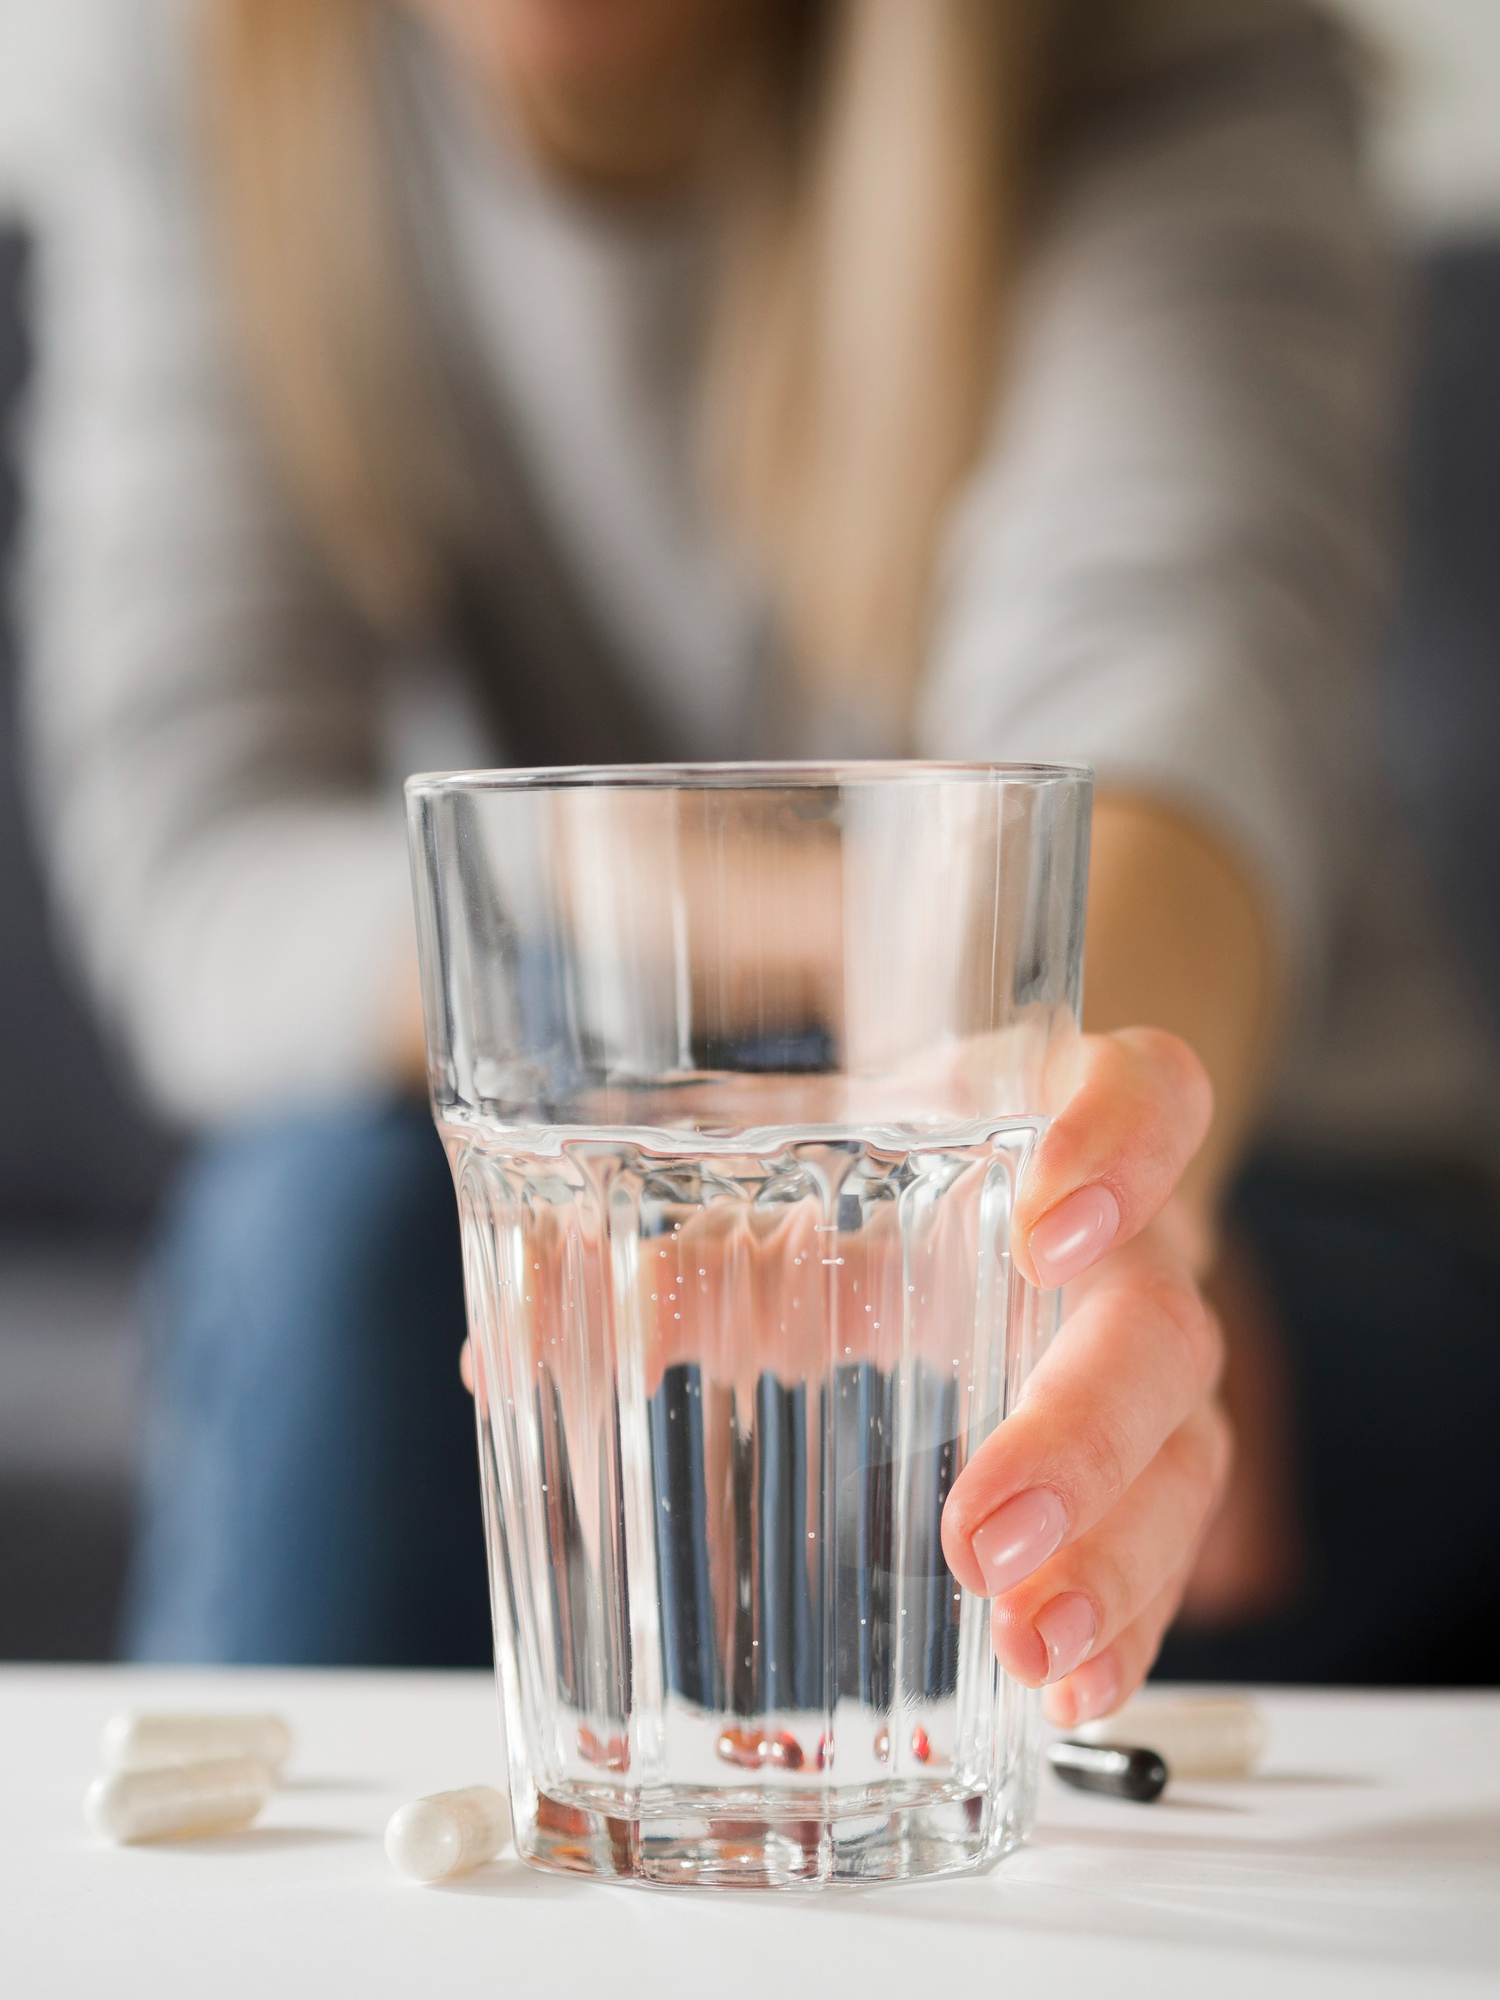 5 Common Mistakes to Avoid While Drinking Water